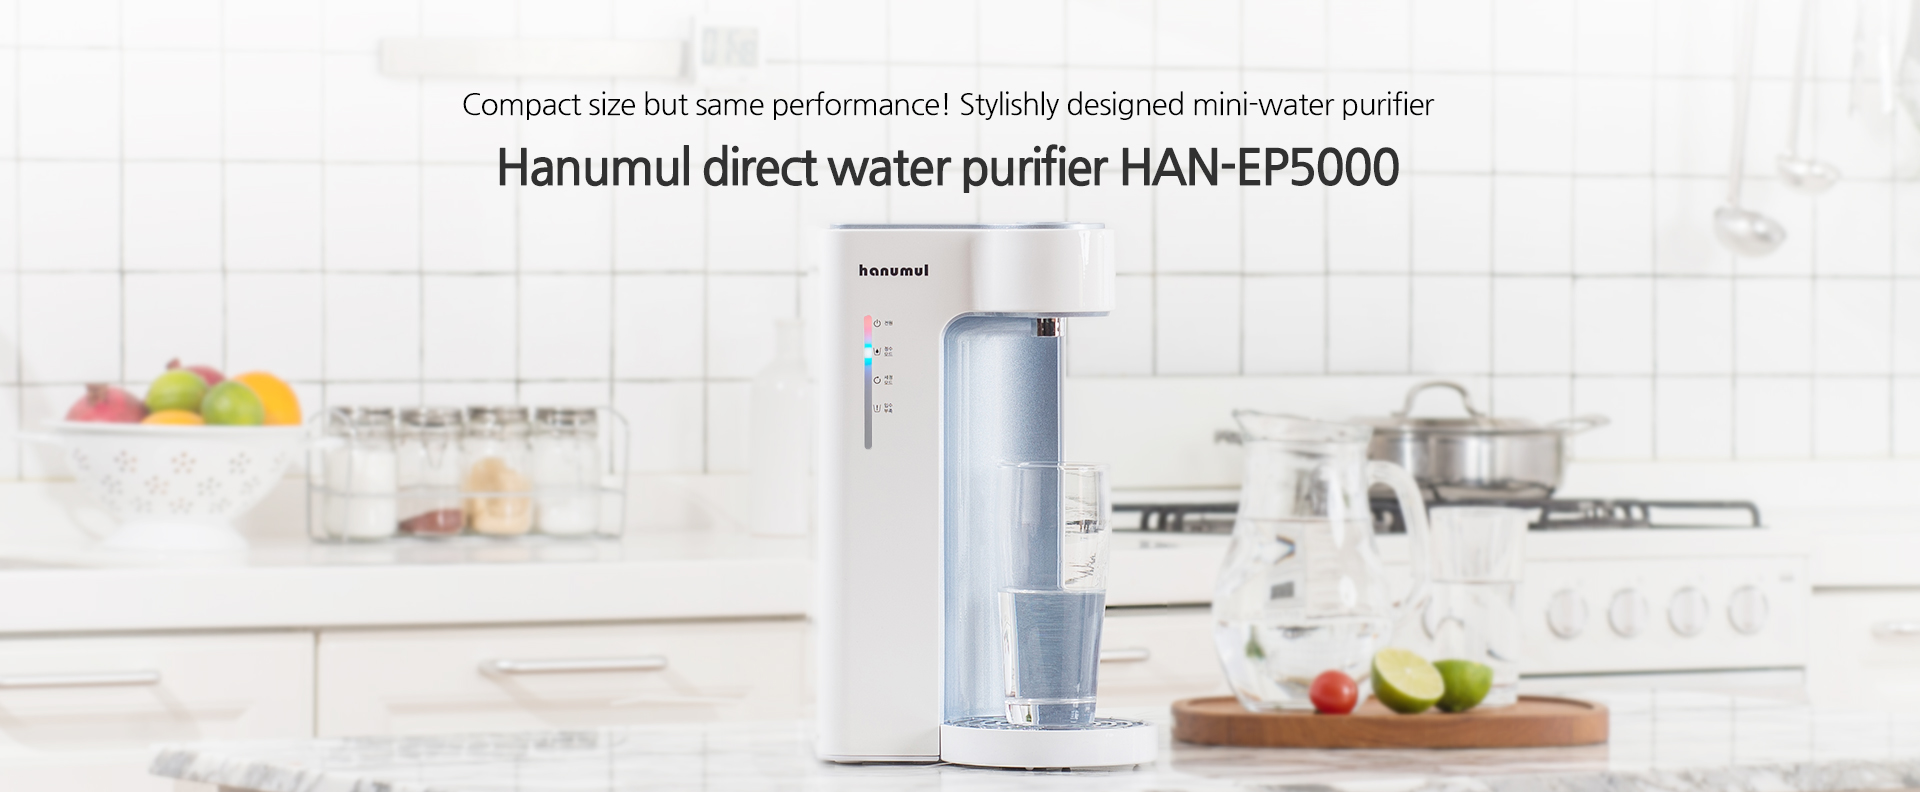 Compact size but same performance! Stylishly designed mini-water purifier,HAN-EP5000 Hanumul direct water purifier HAN-EP500